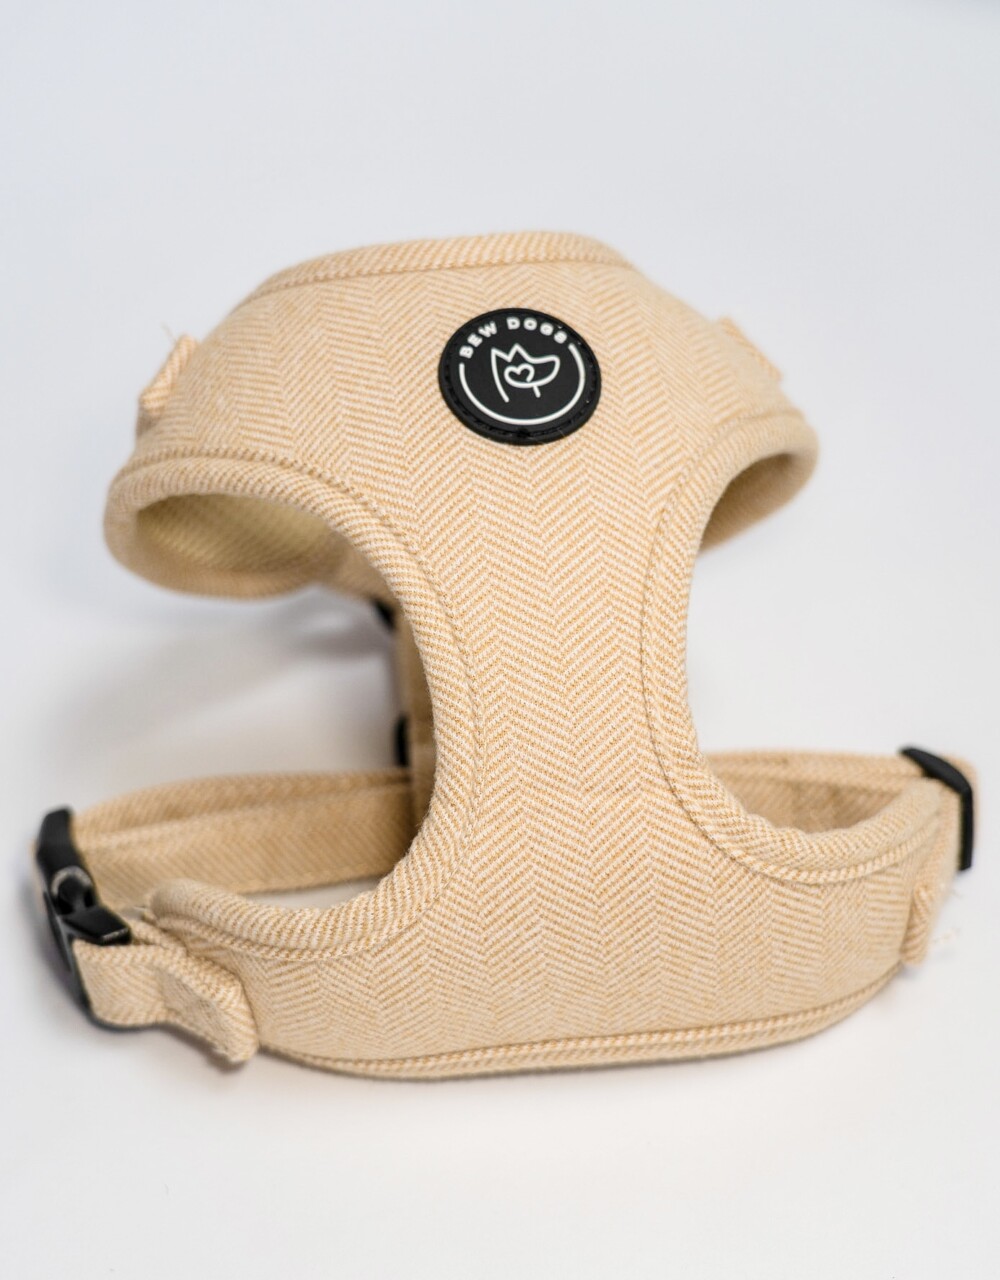 A cream herringbone dog harness with adjustable straps on a white background.